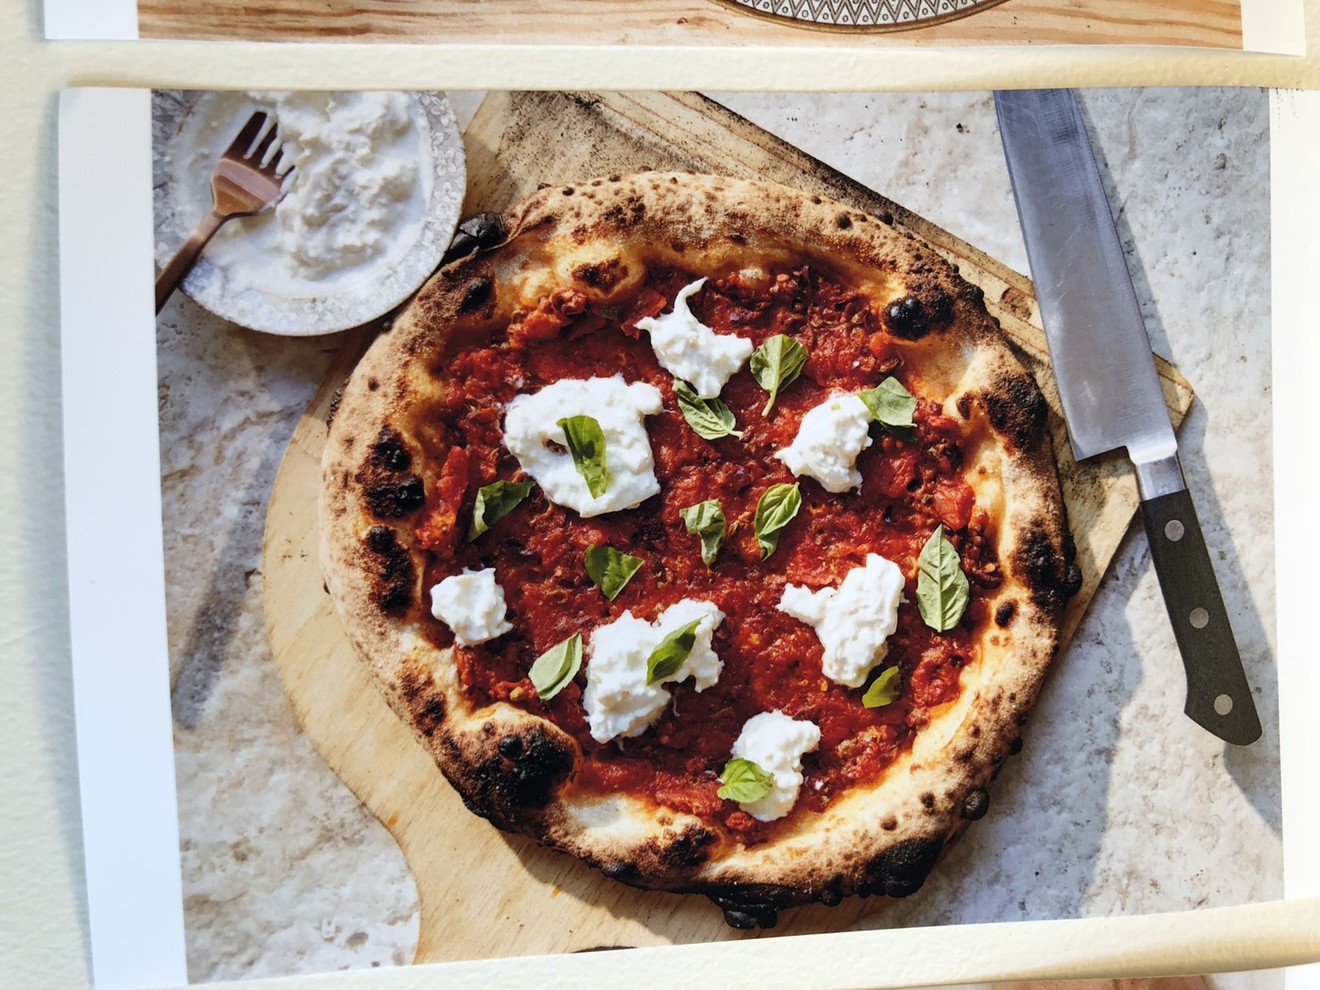 Michael Schwartz's stracciatella pie is one of his favorite recipes listed in his forthcoming cookbook, Genuine Pizza.